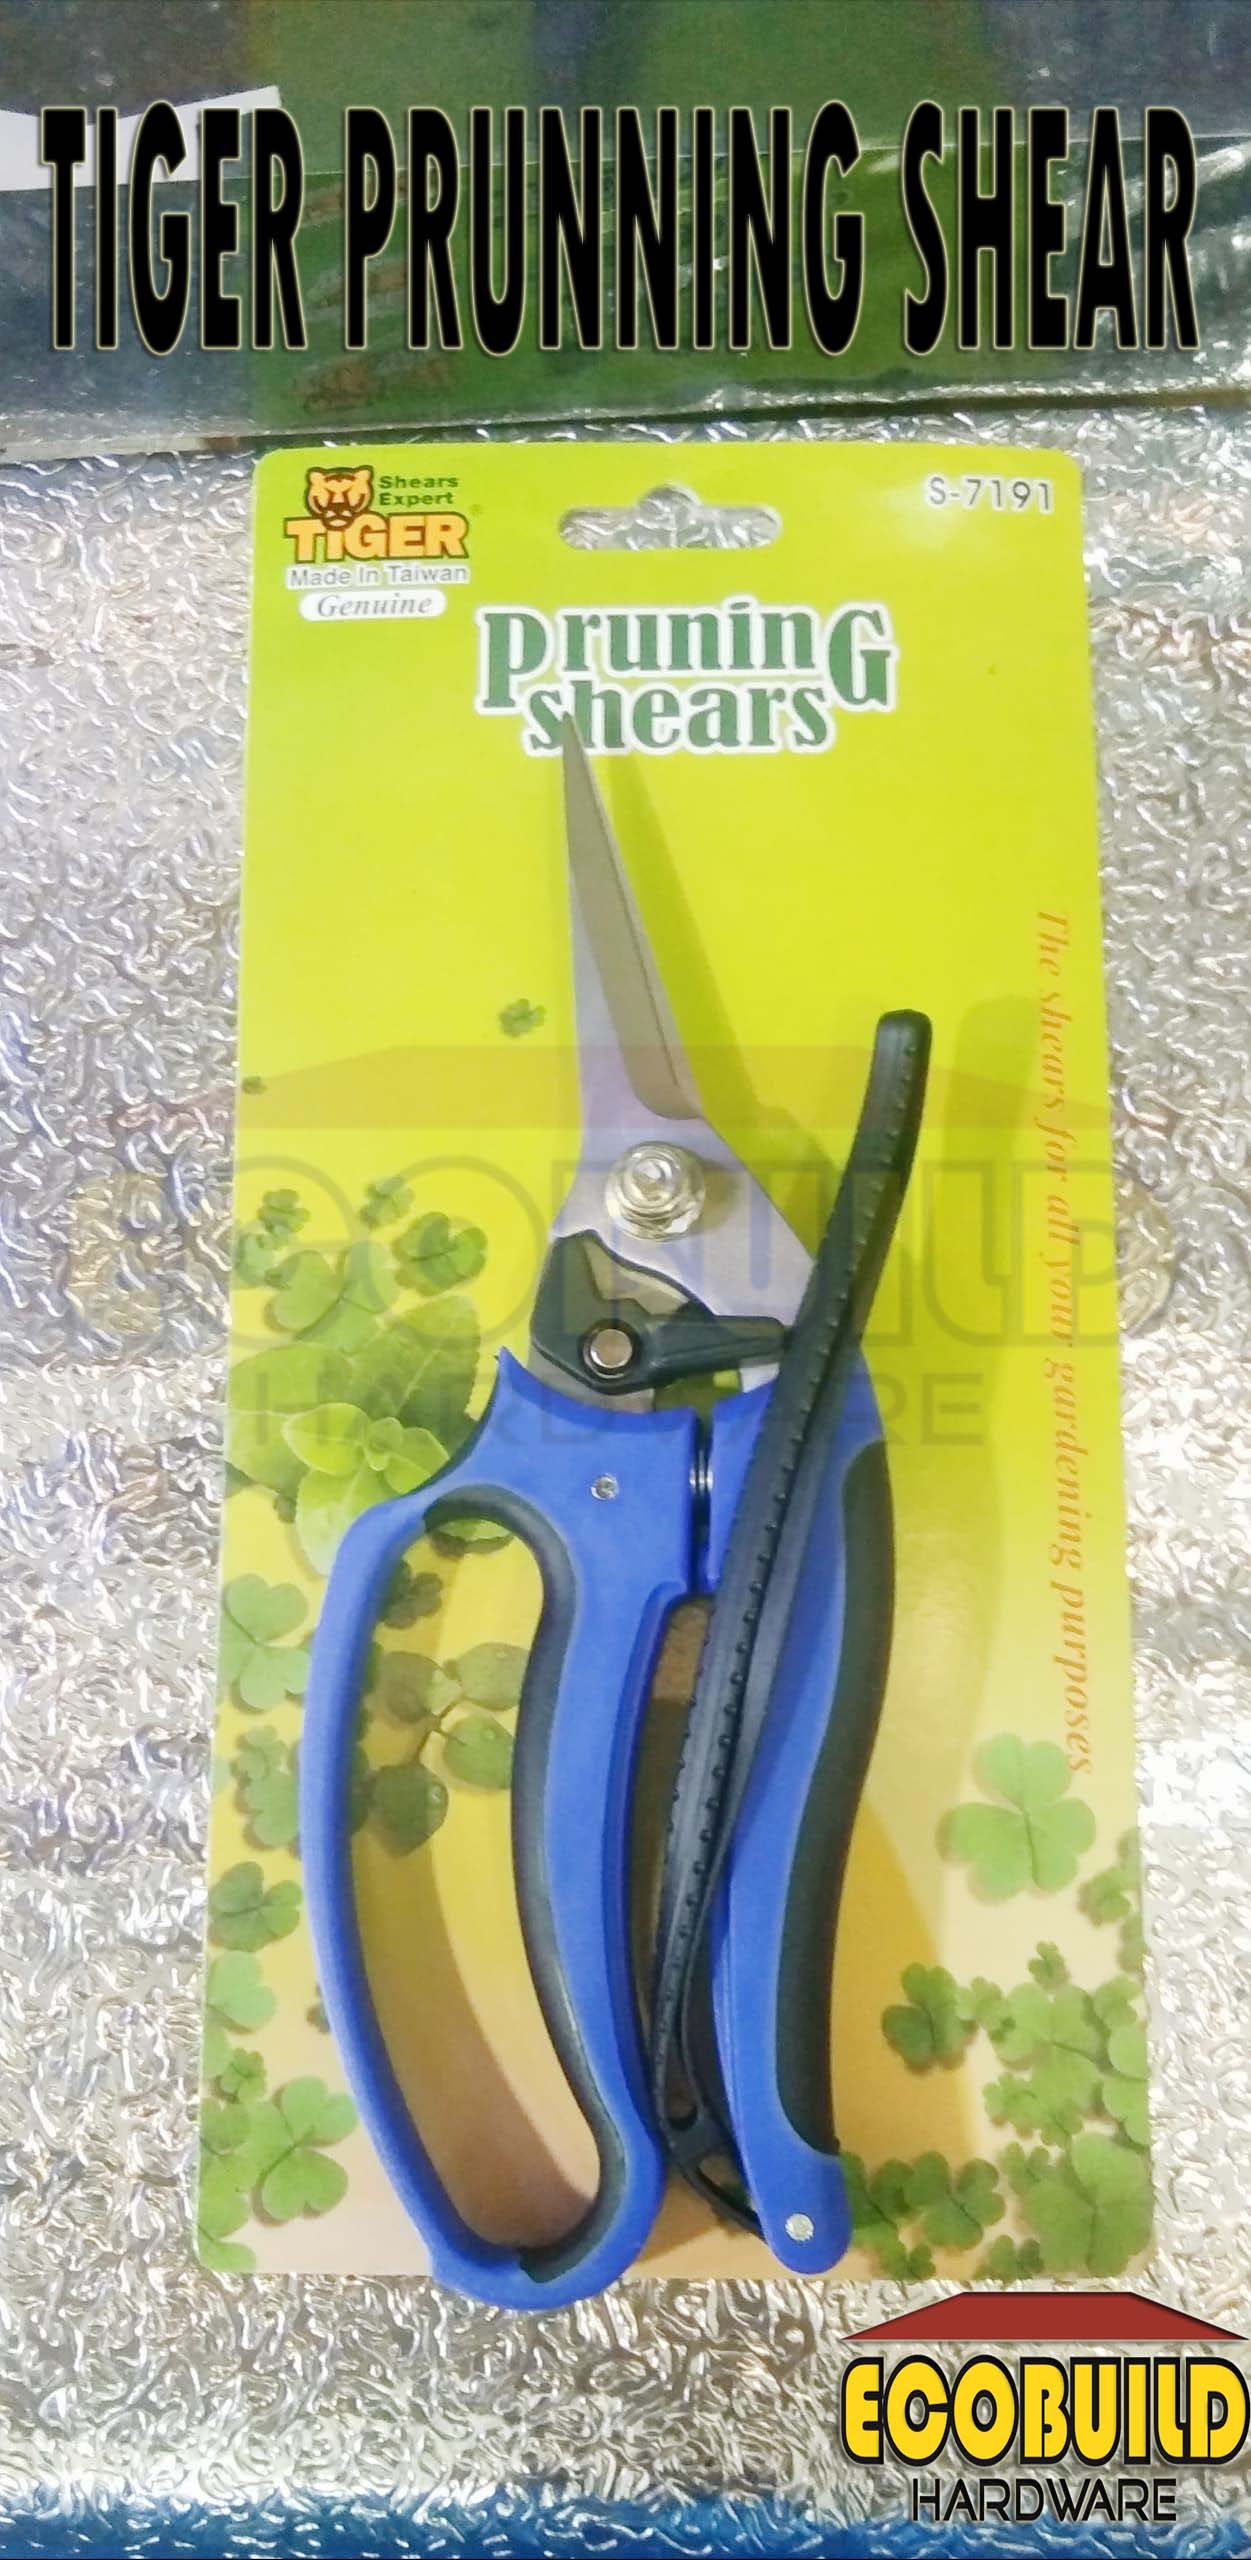 TIGER Pruning Shear (S-7190 / S-7191)